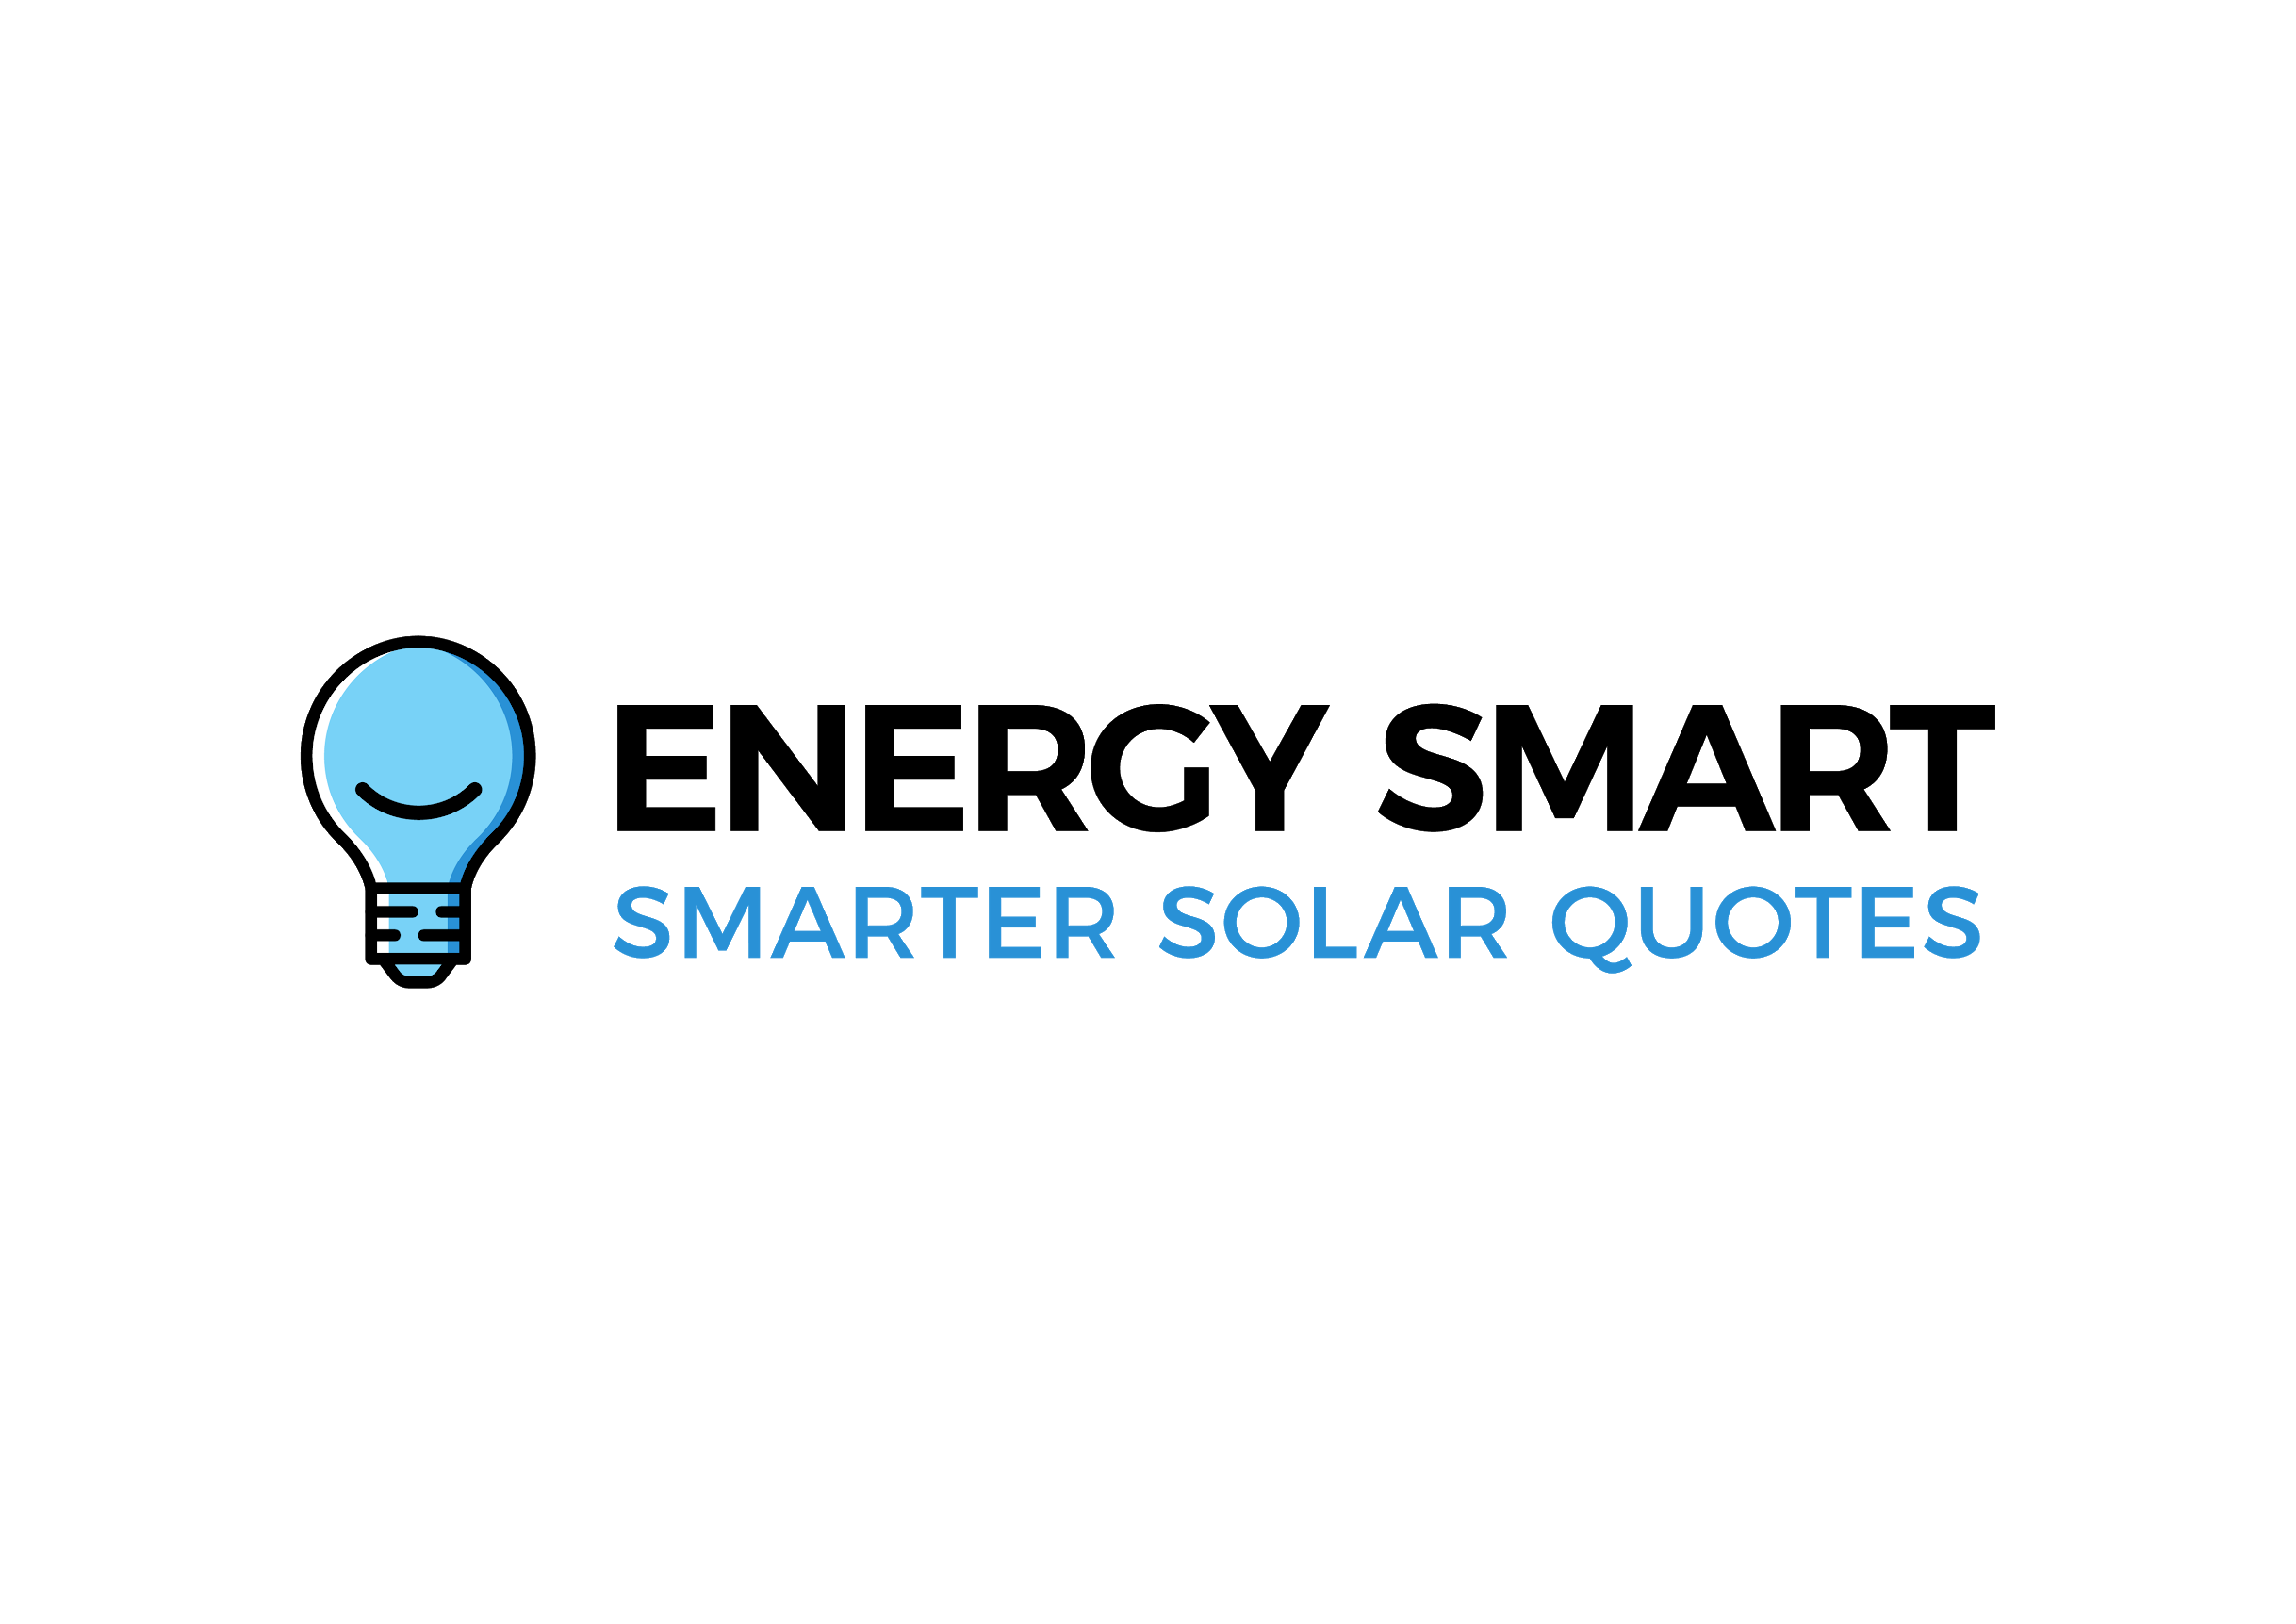 EnergySmart.com.au Empowers Consumers with Top Solar Installers & Expert Insights